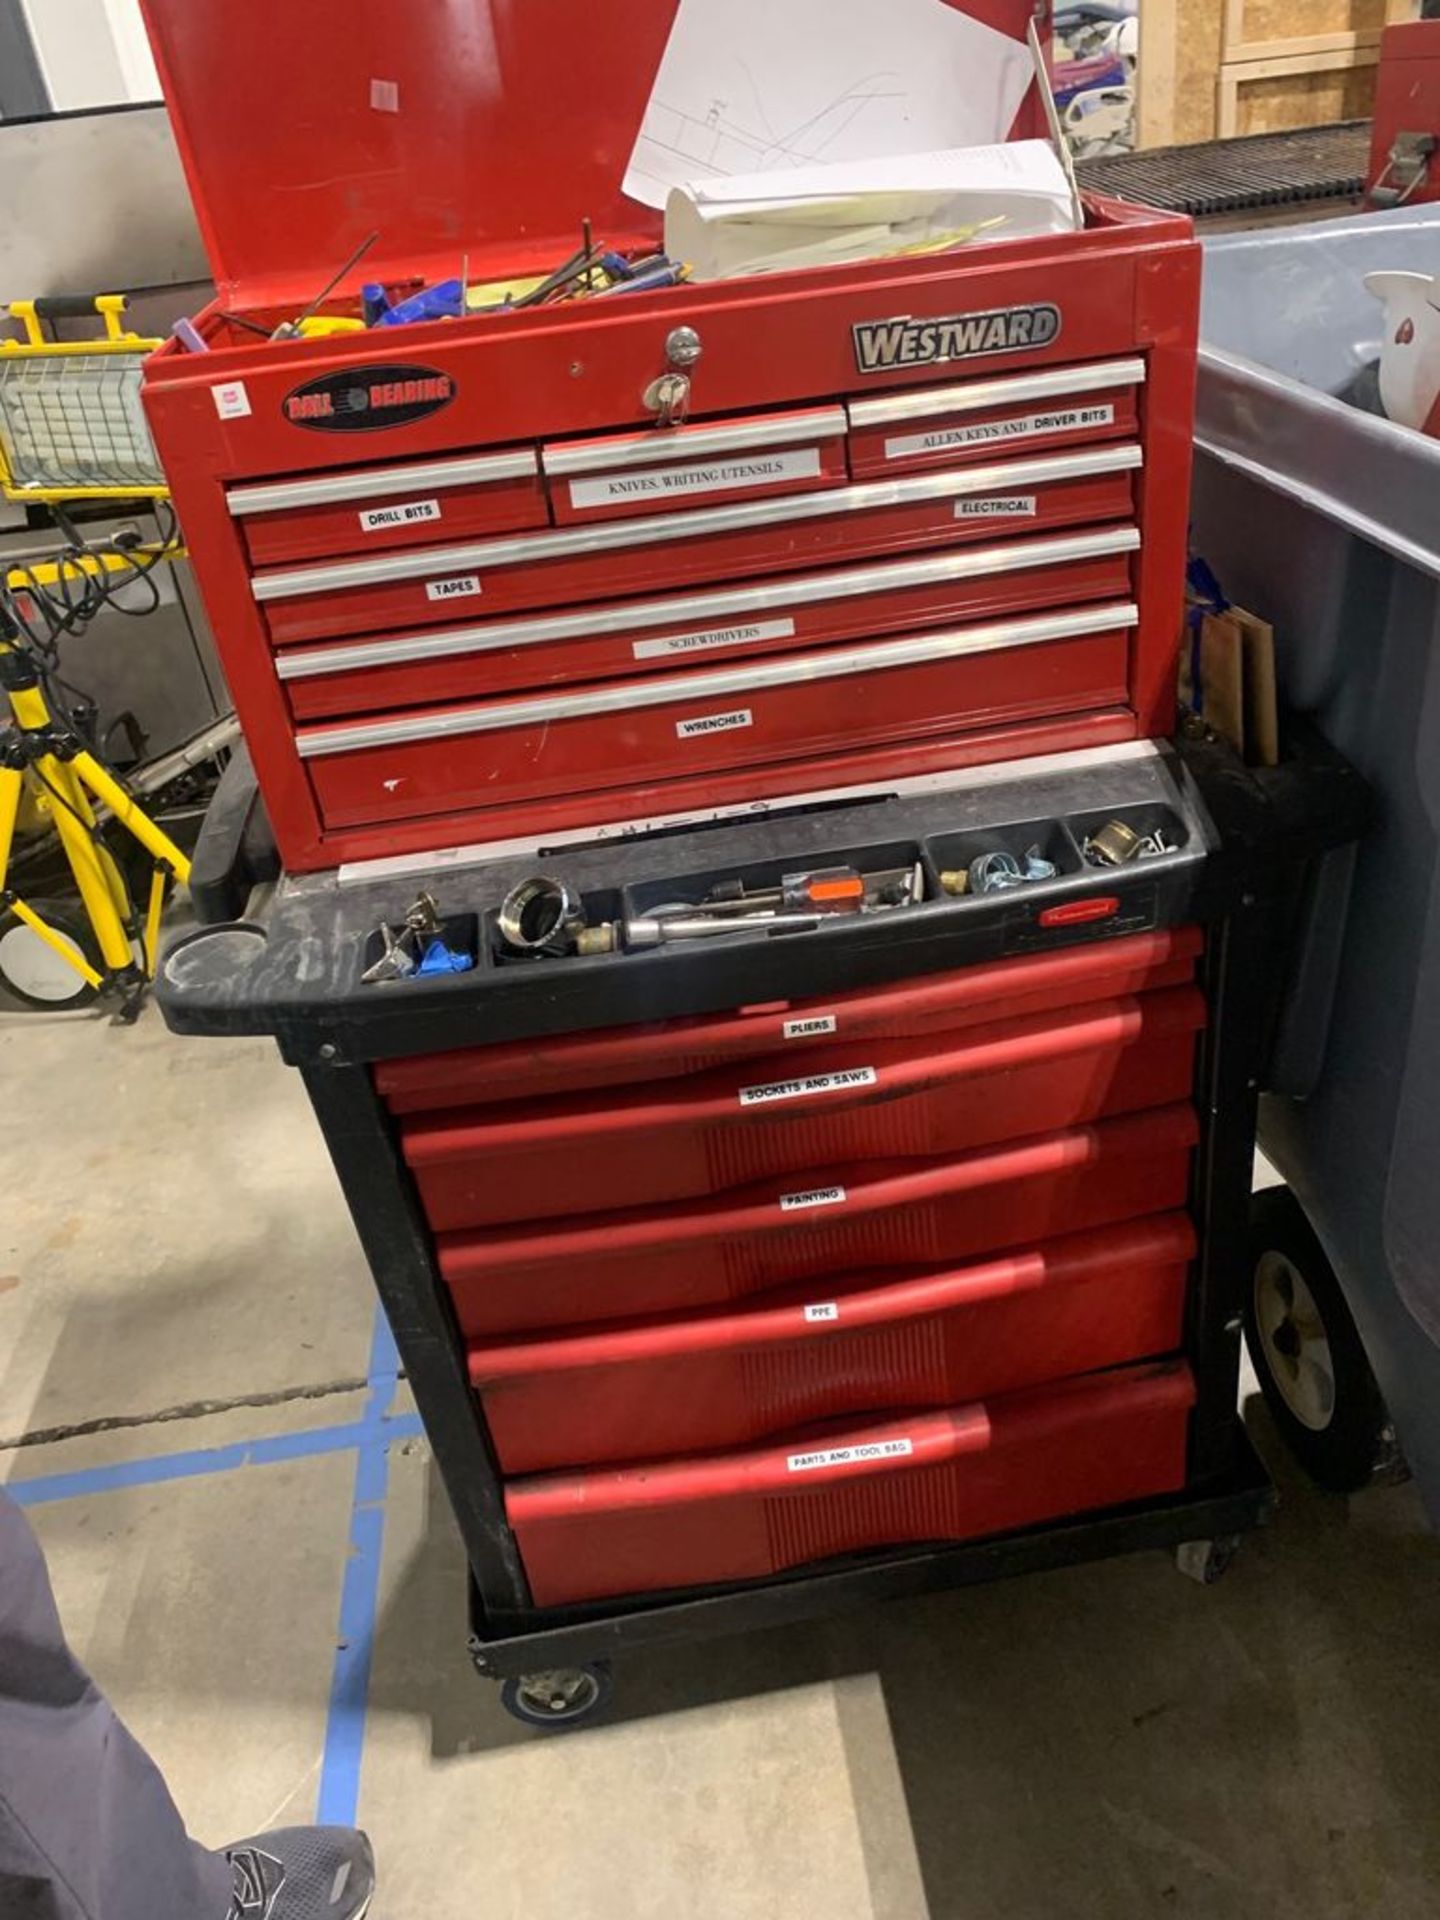 WESTWARD TOOL CHEST ON ROLLING CART, CONTENTS INCLUDED